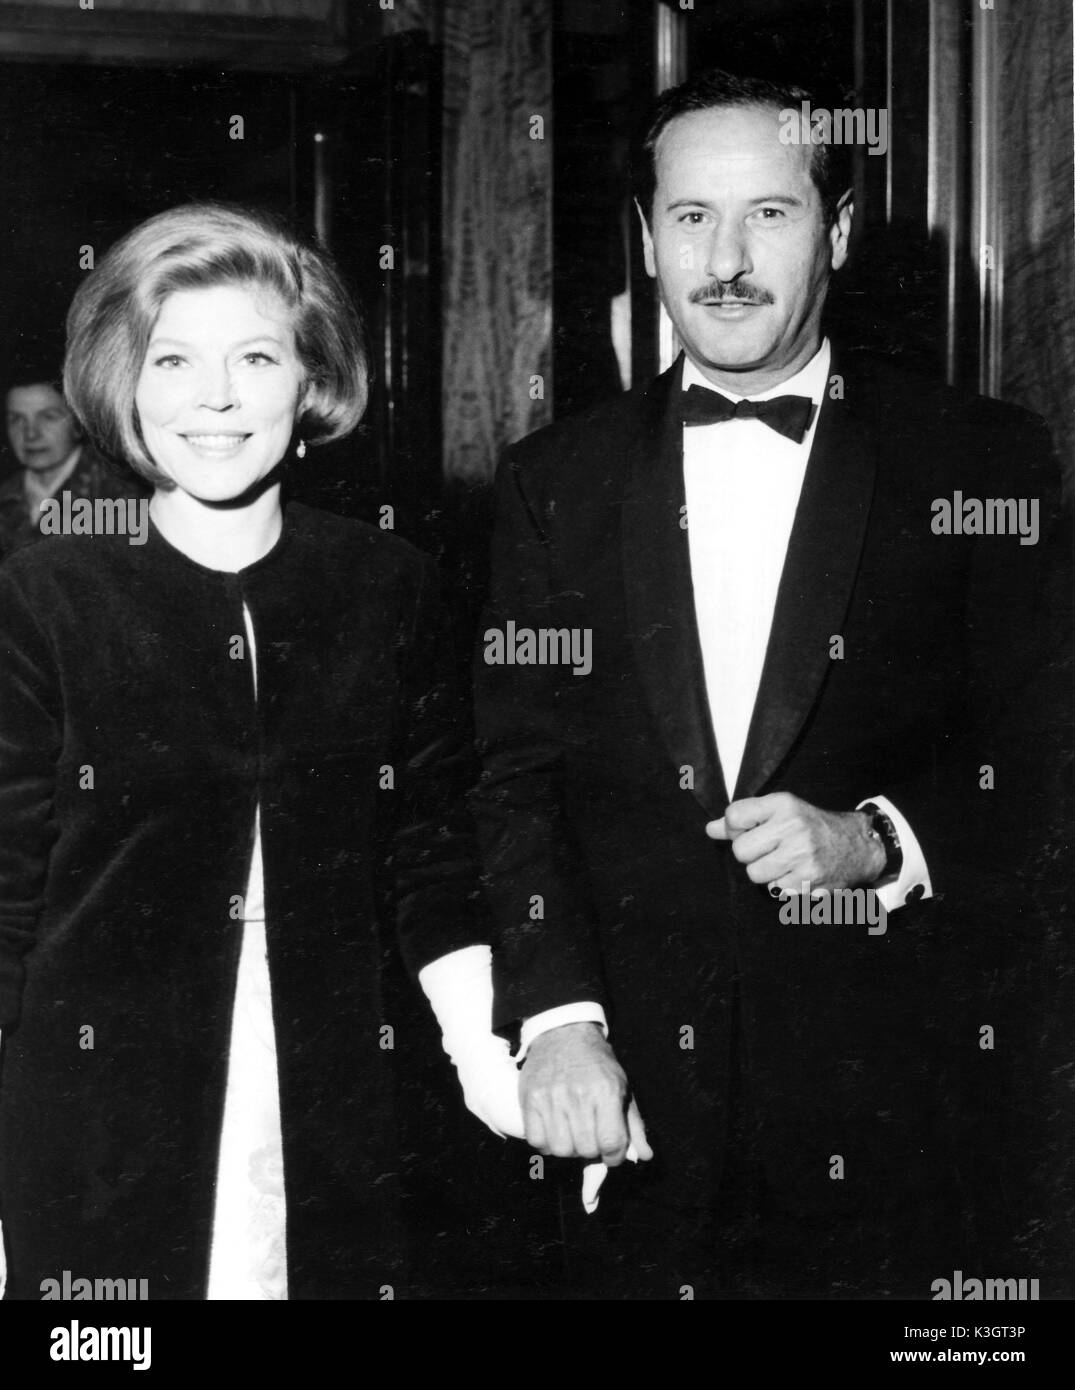 American actor ELI WALLACH and his wife, actress ANNE JACKSON at the Royal World Film Premiere of the THE VICTORS at the Odeon Cinema, Leicester Square, London on November 18th 1963 Stock Photo